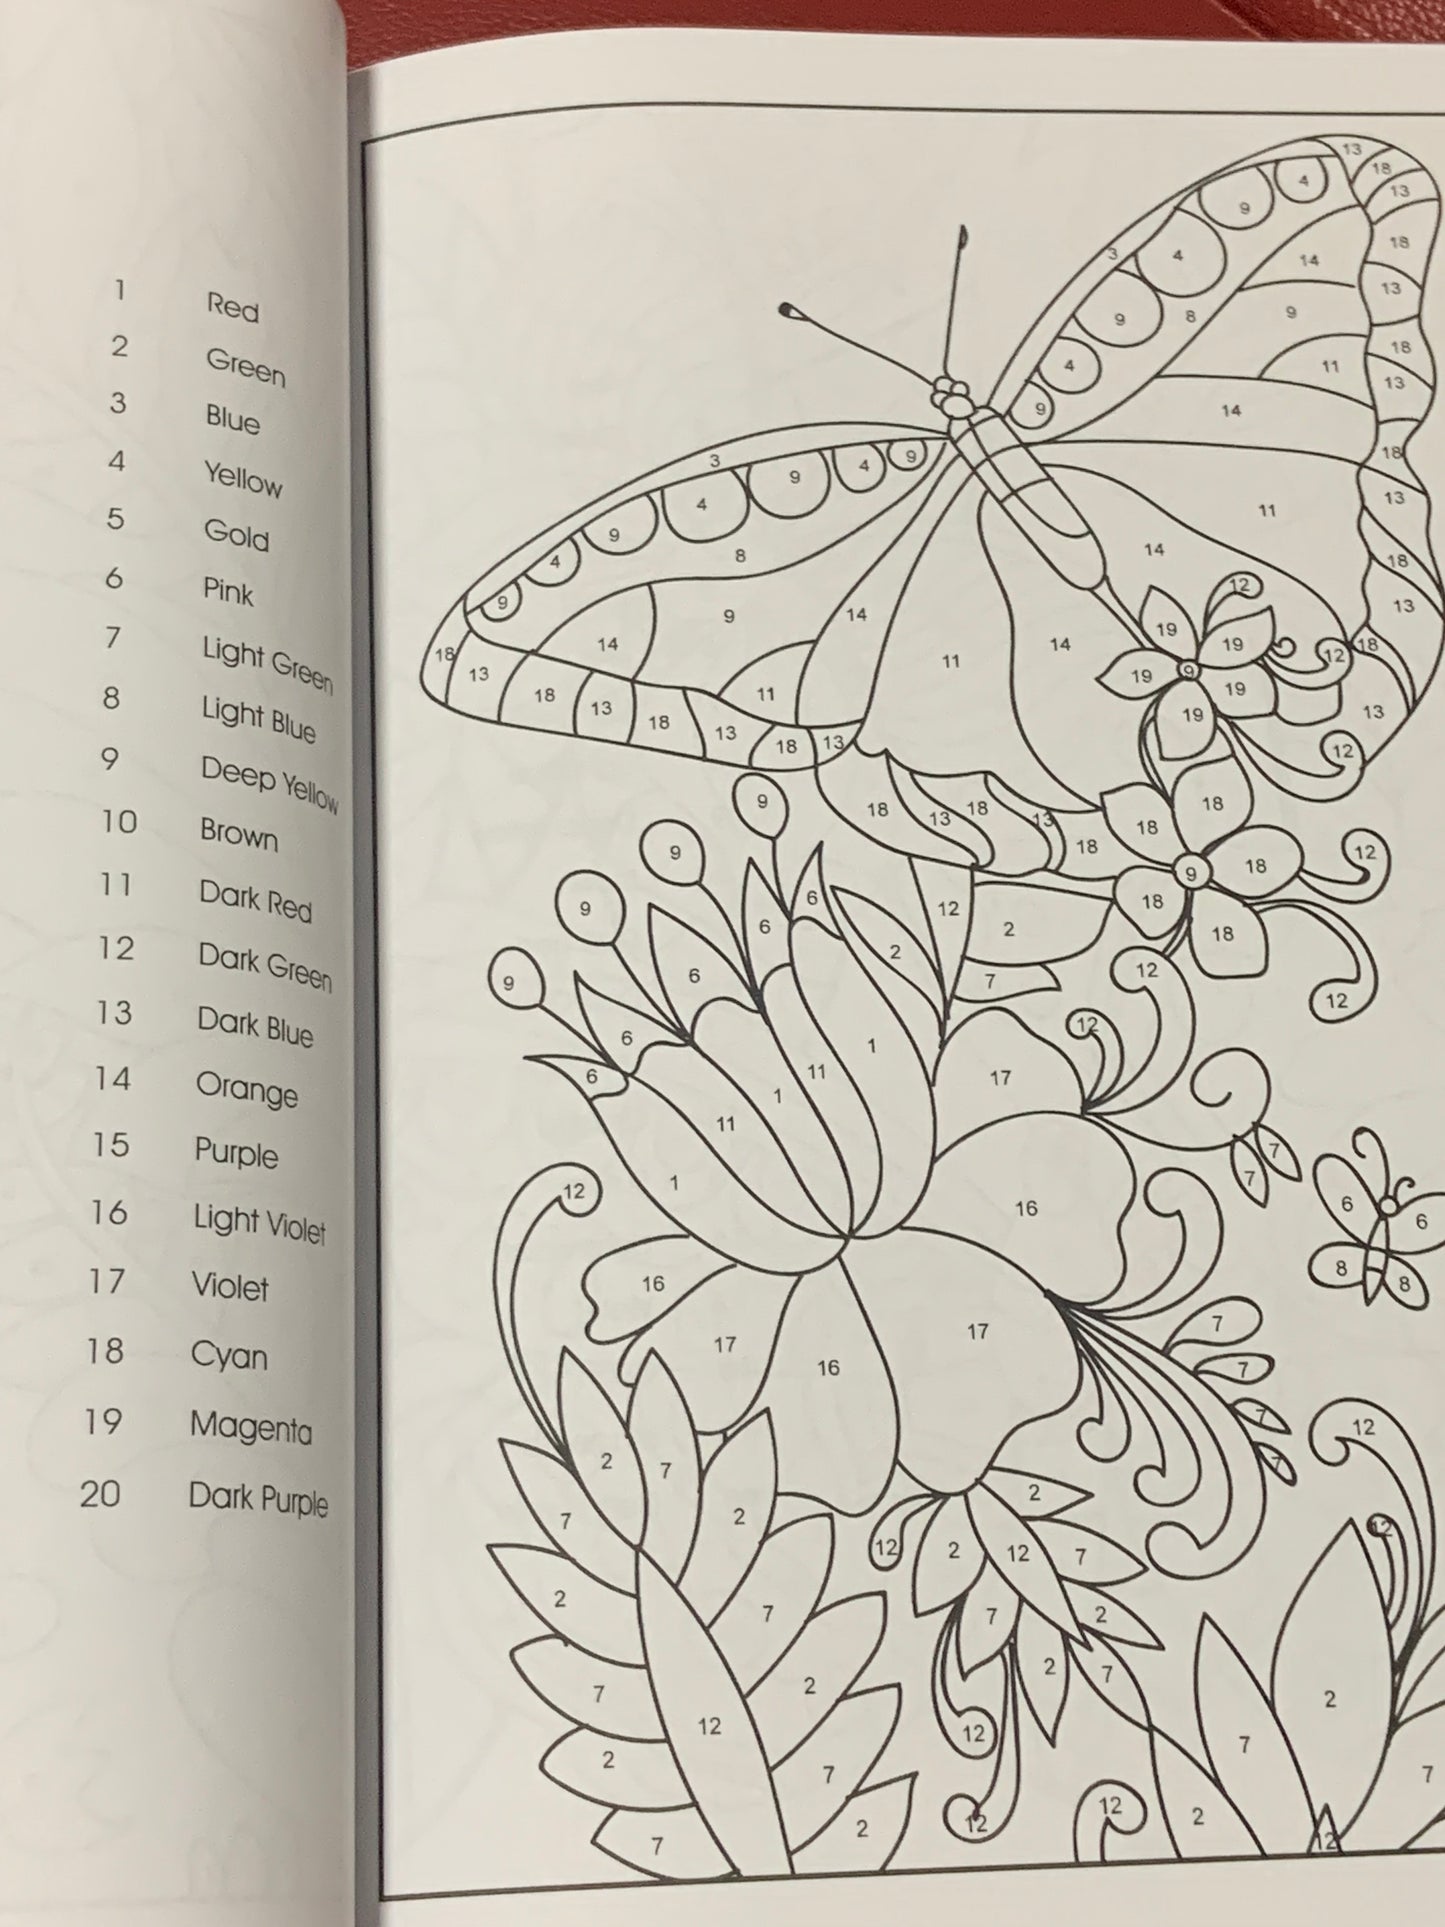 Coloring By Numbers - Big Book of Simple